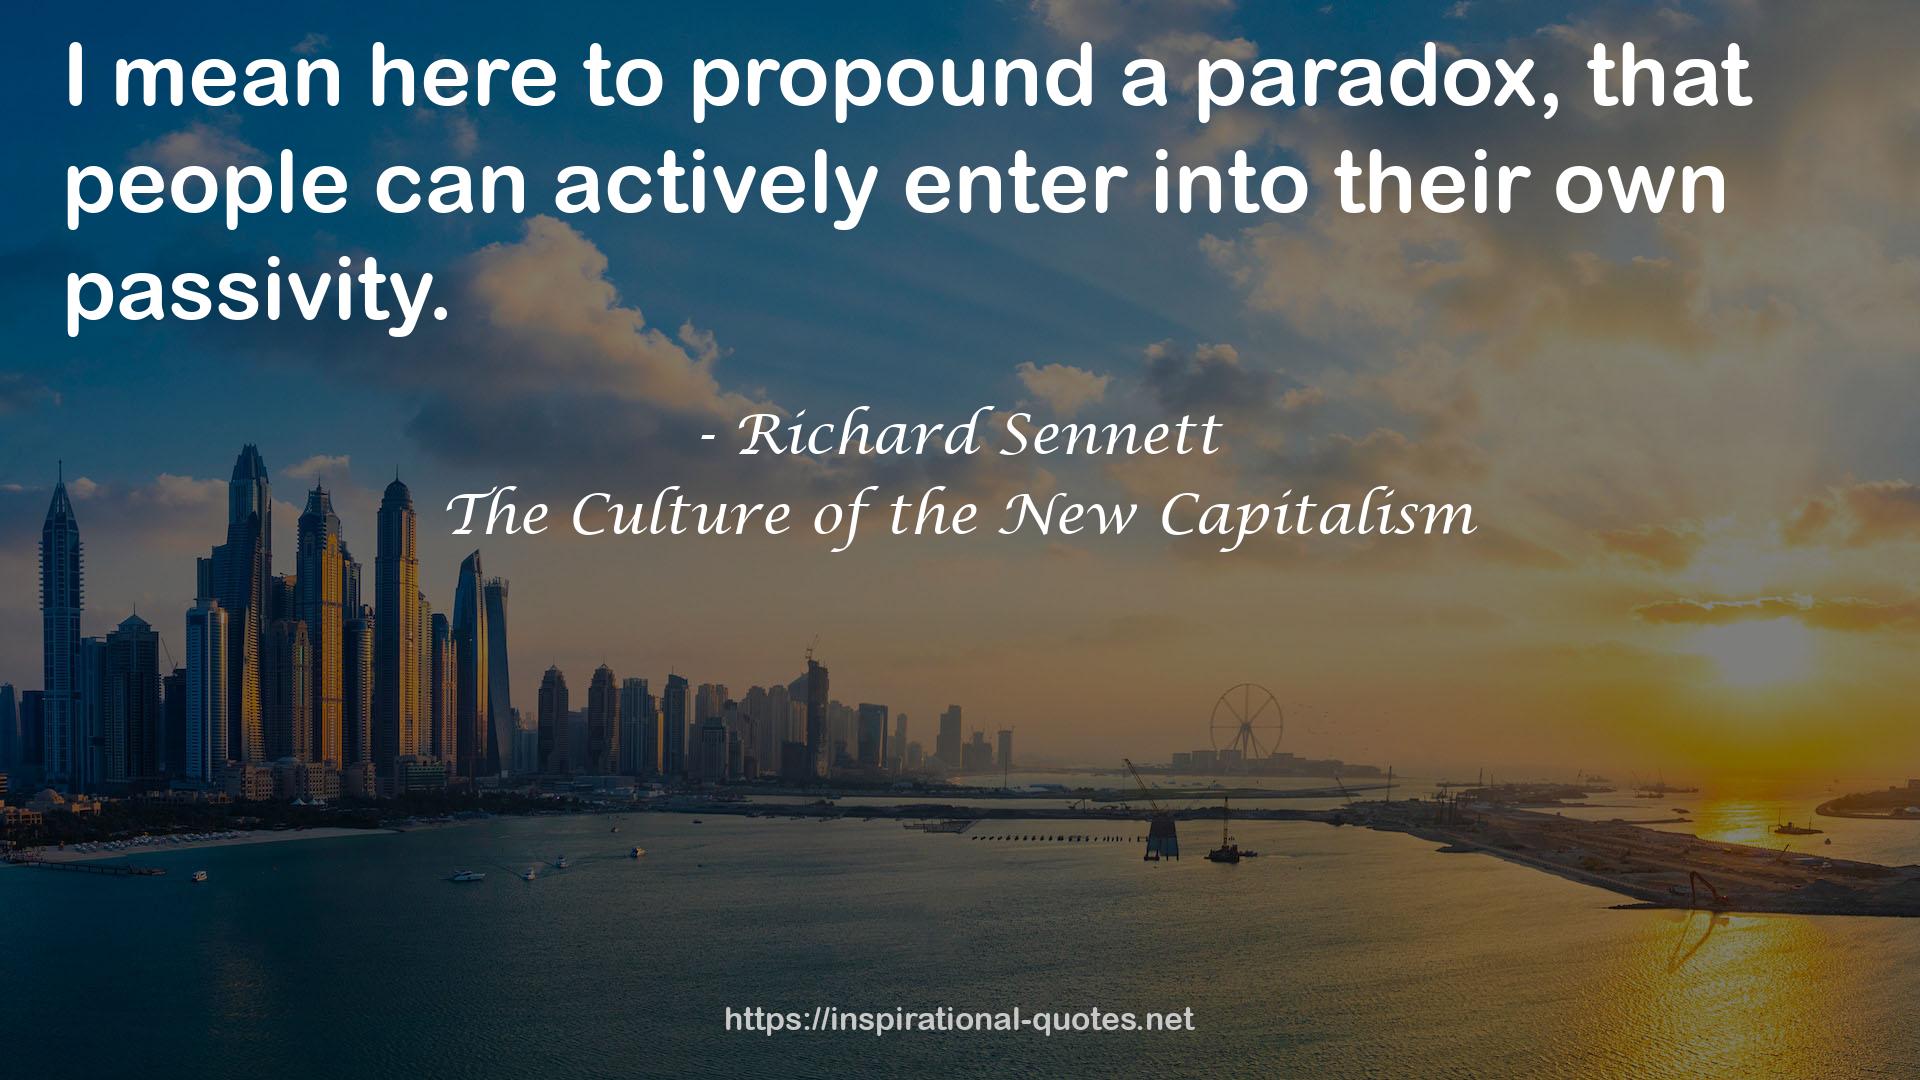 The Culture of the New Capitalism QUOTES